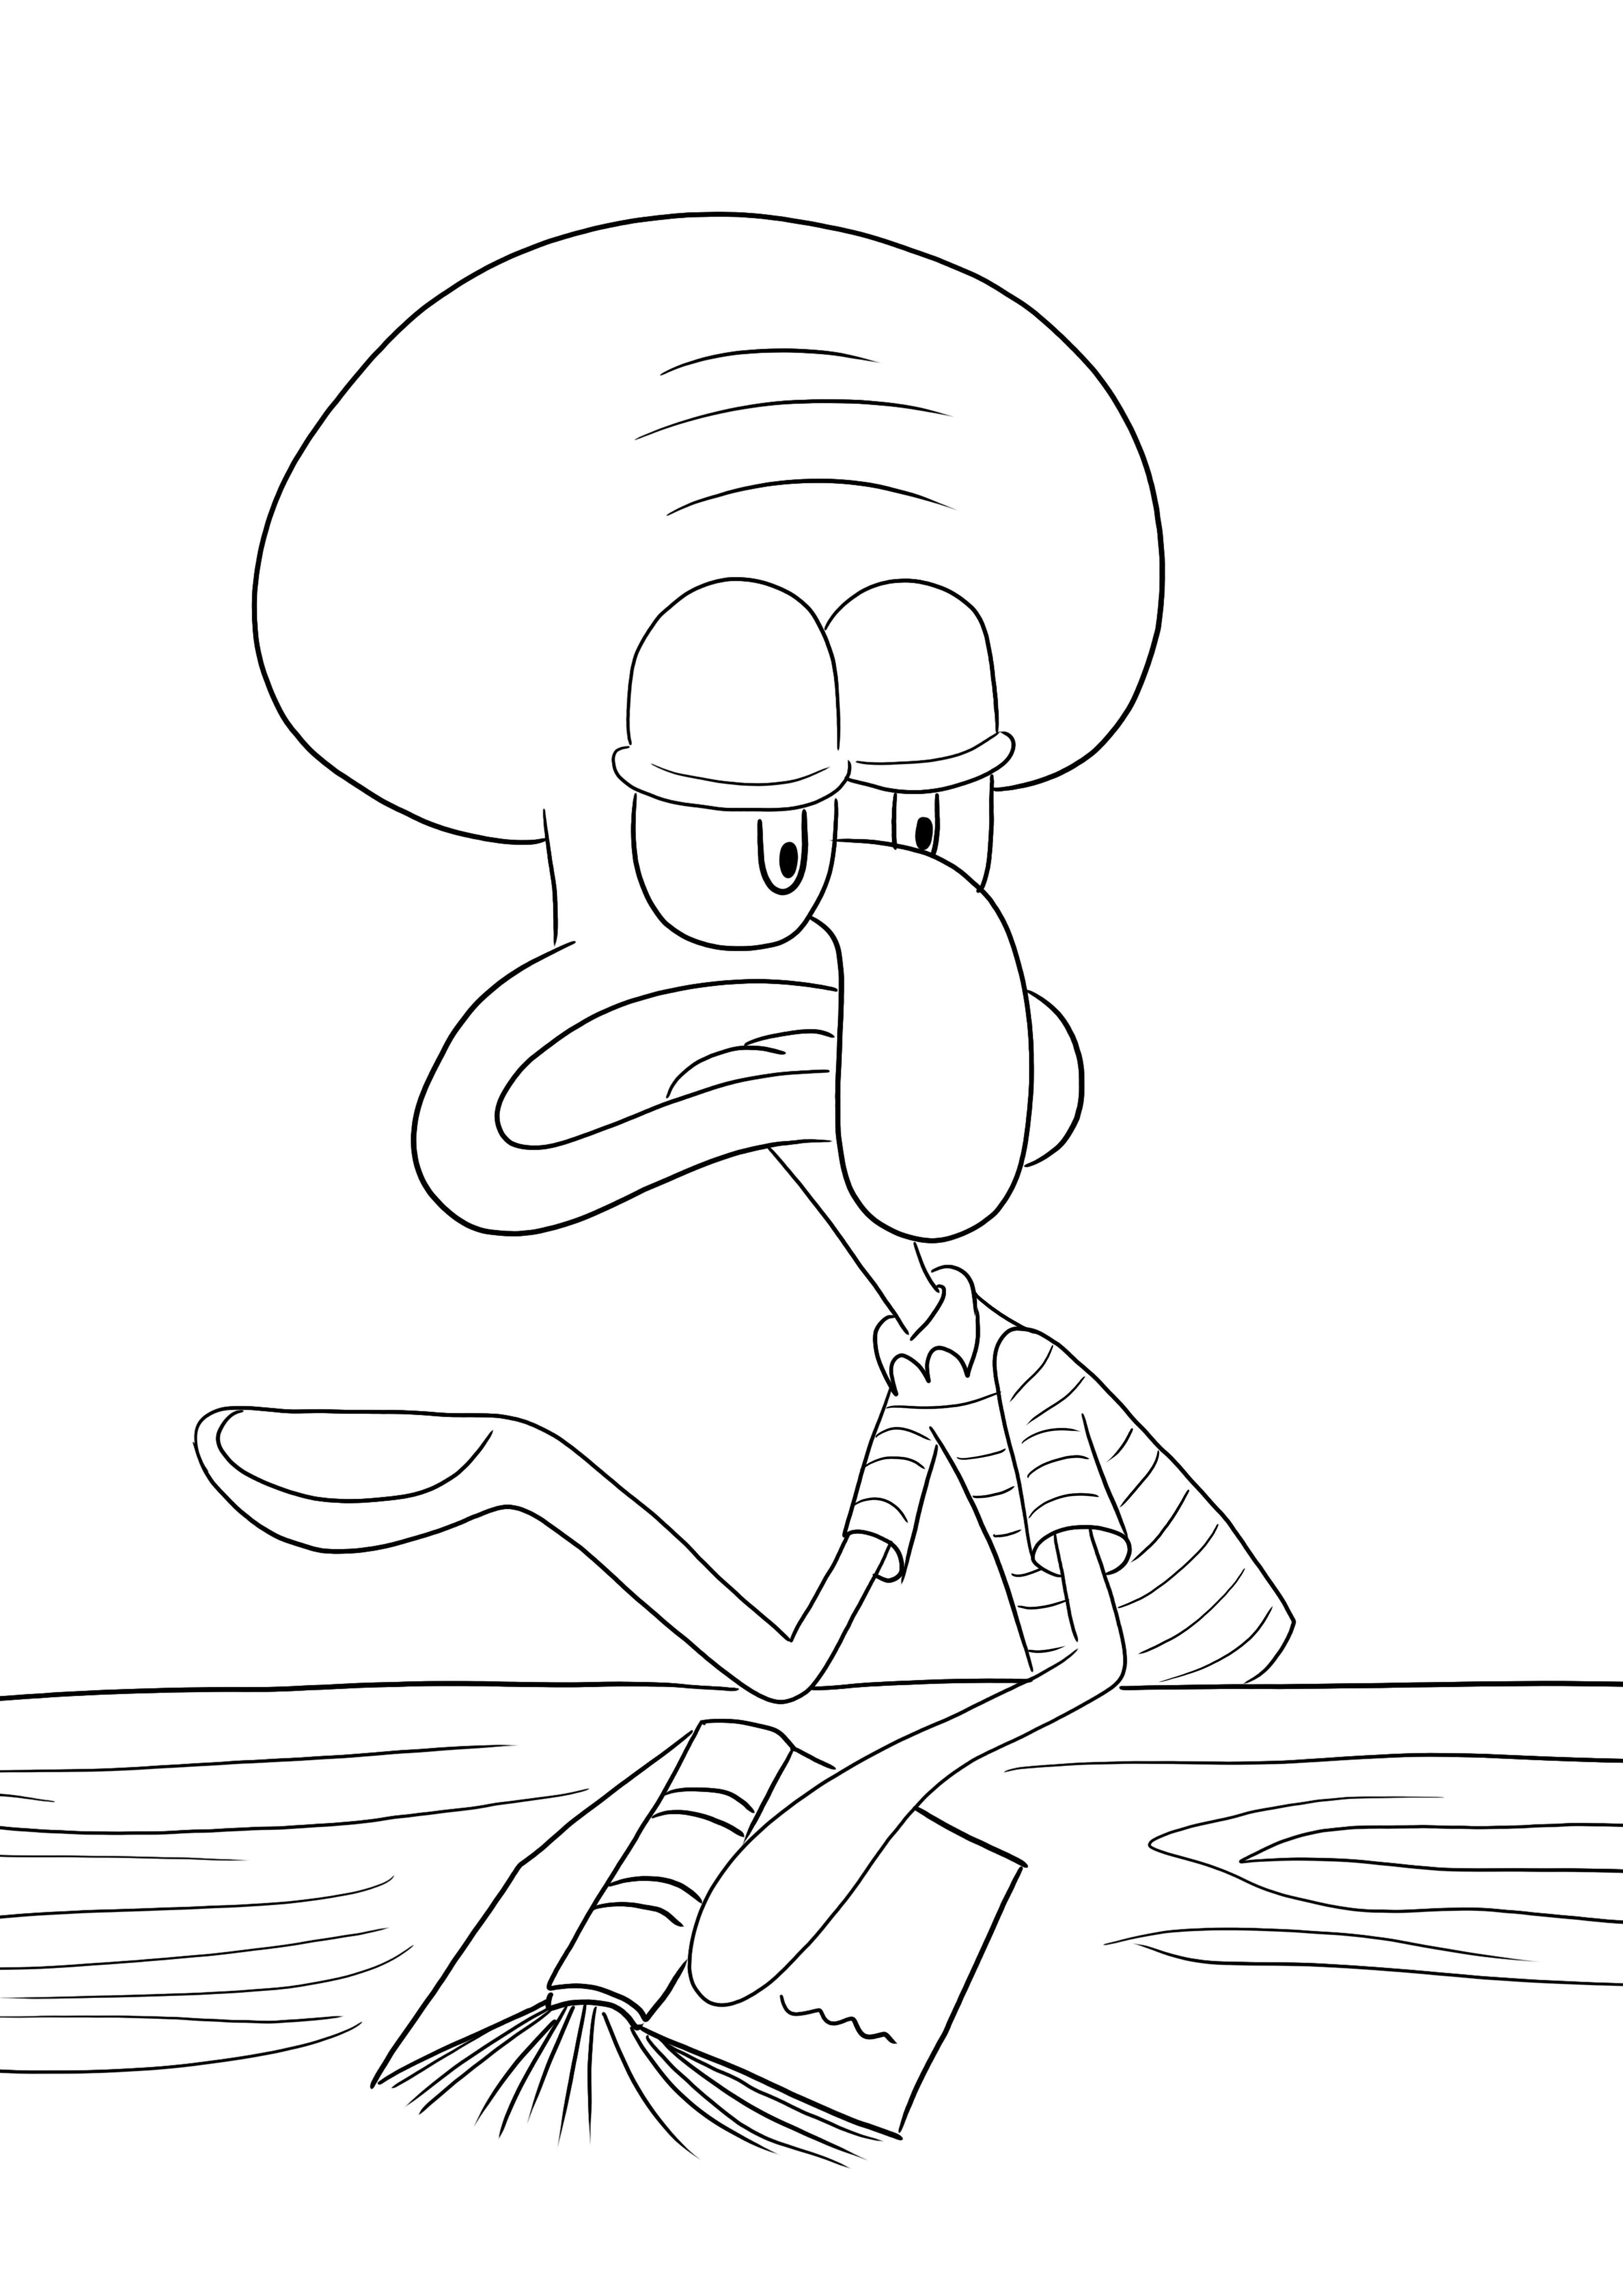 Squidward free to color and print or direct download image